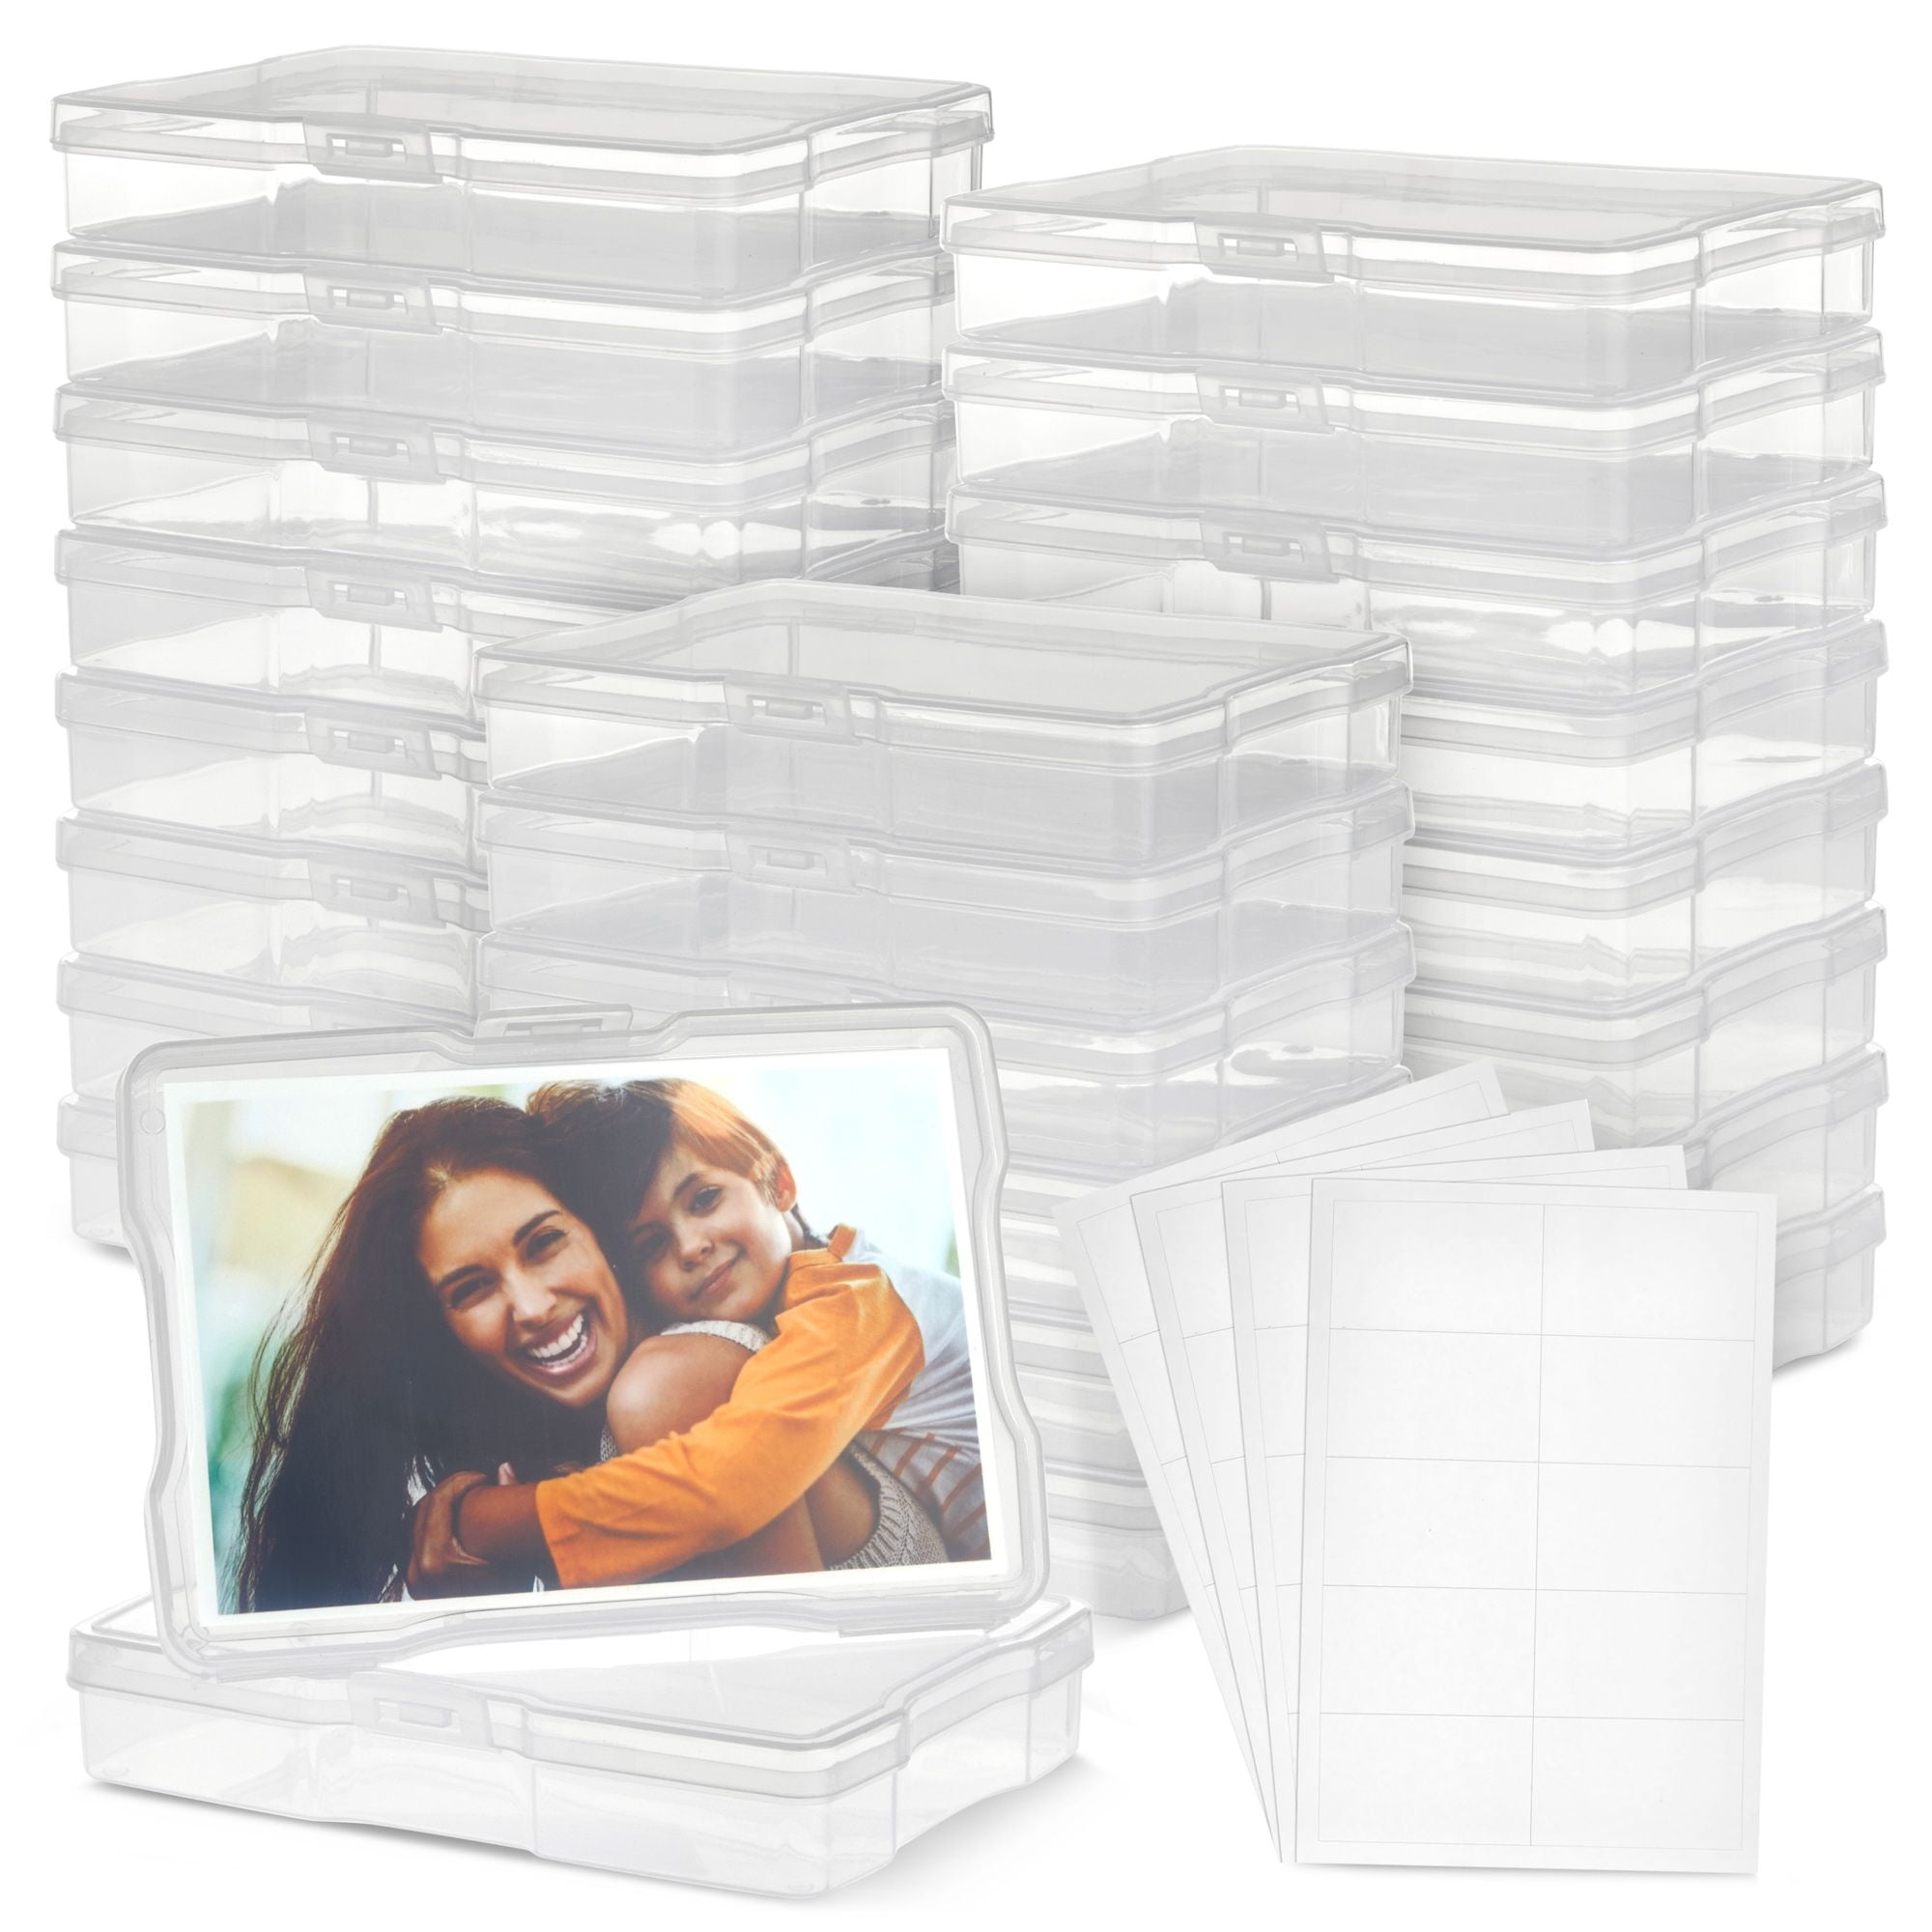 Photo Storage Box by Simply Tidy - Store and Protect Pictures, Documents,  and Prints - Black, Bulk 12 Pack 